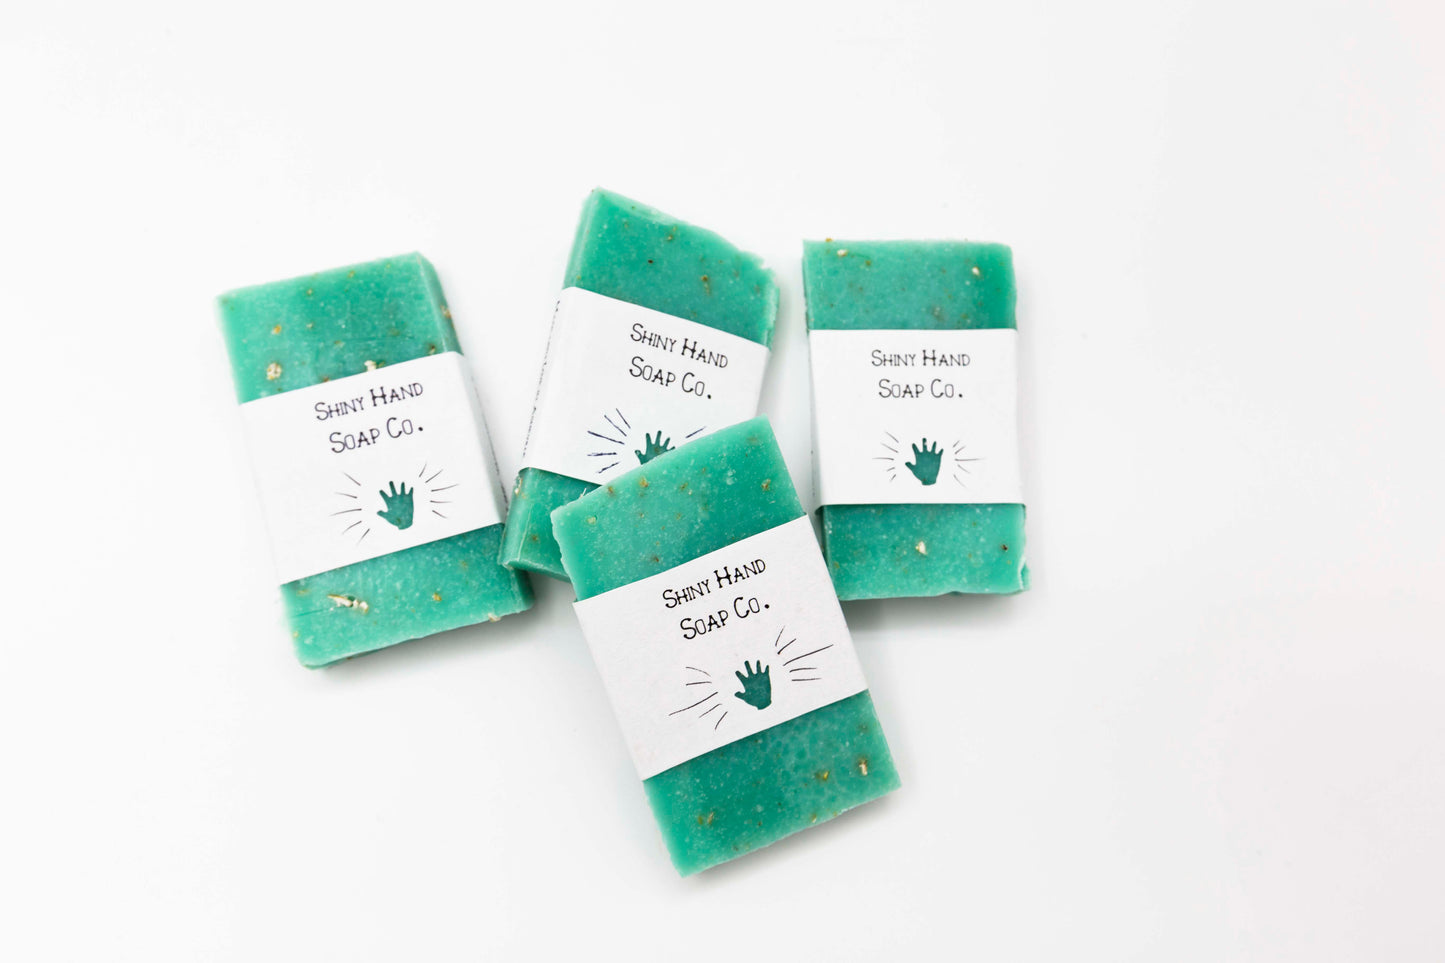 Four miniature aqua blue eucalyptus oatmeal soaps flecked with ivory colored oats sit on a clean white background with white paper wrappers that have a hand shape cut out of them.